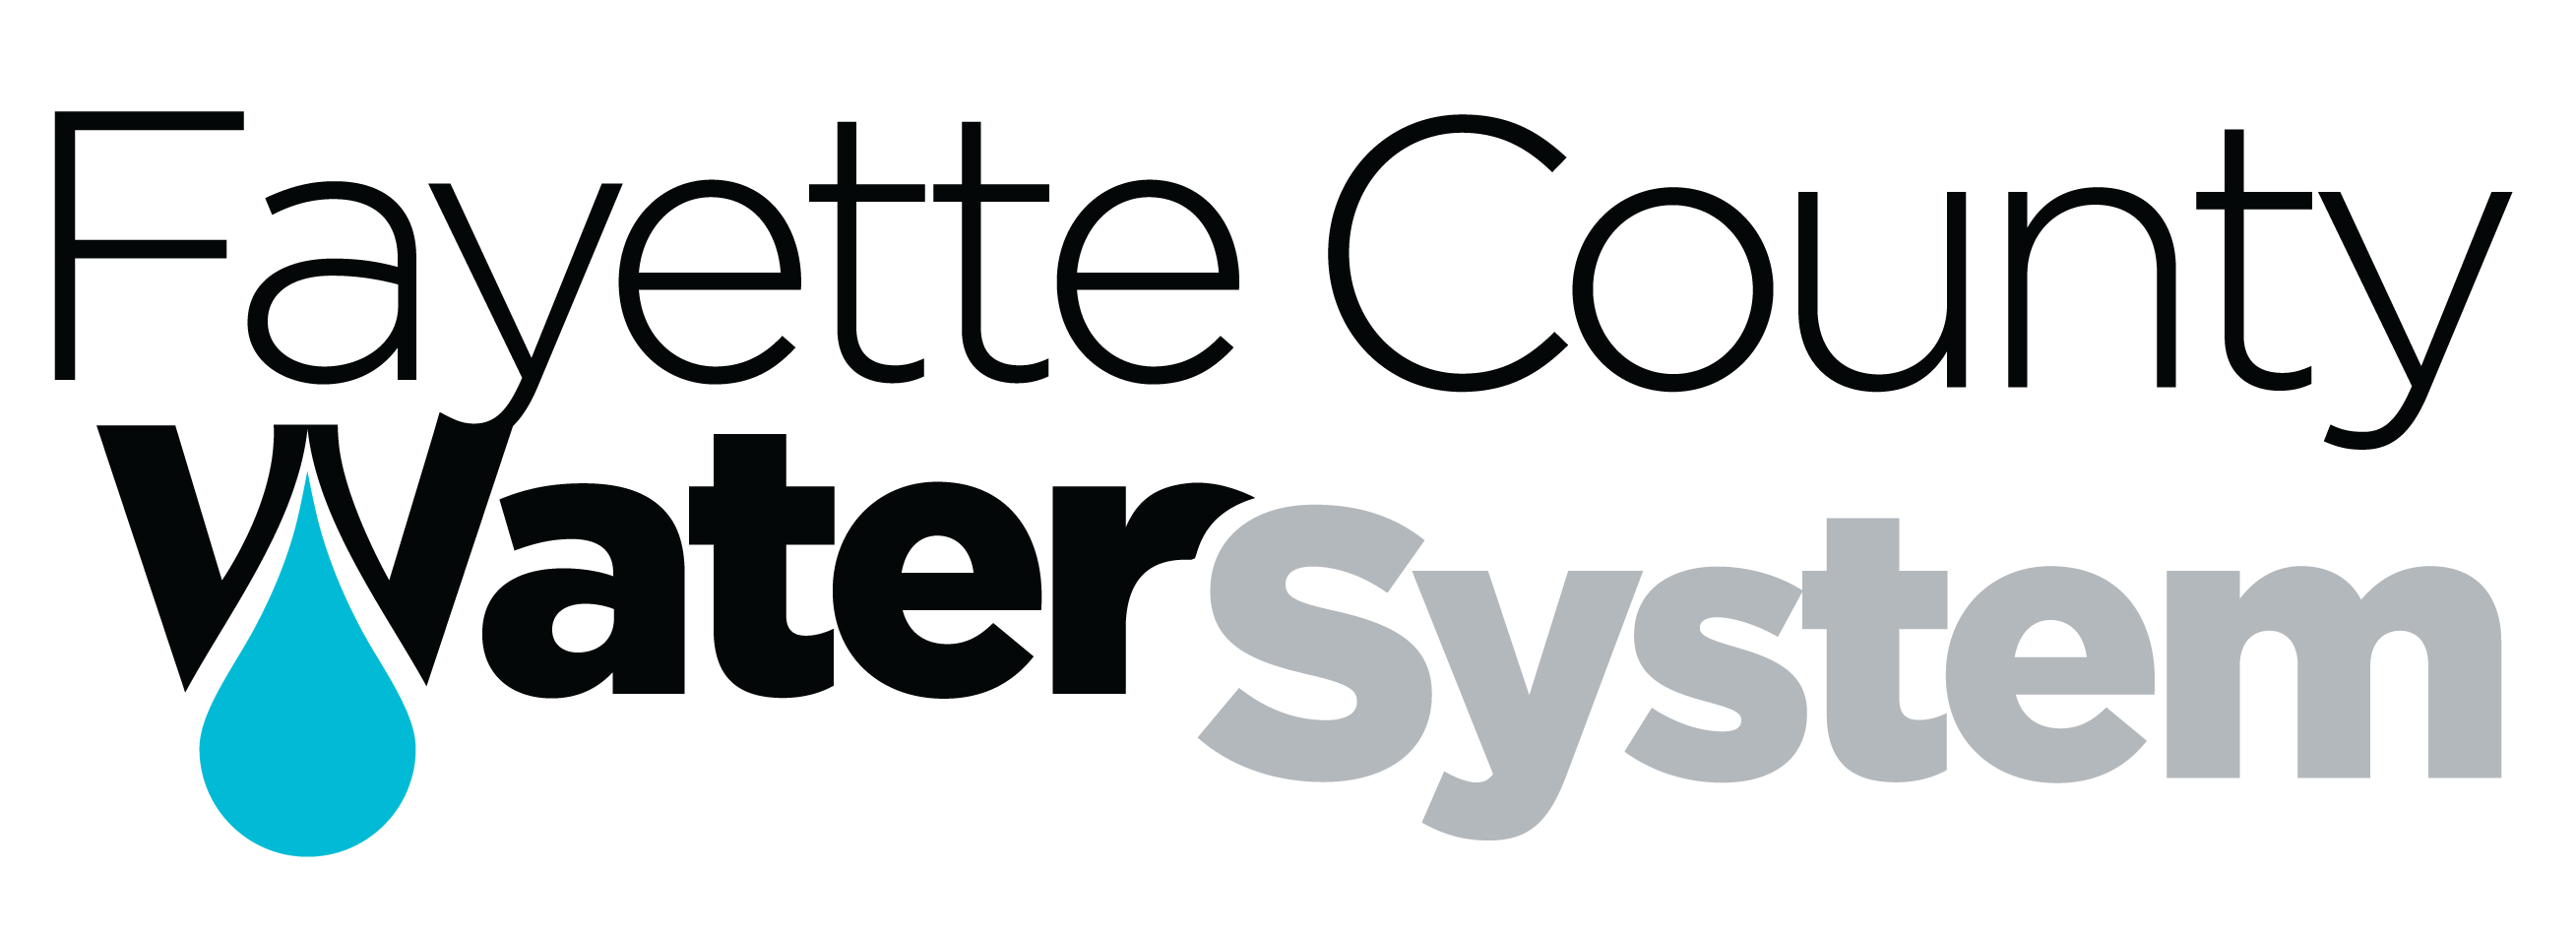 Click to go to the Fayette County Water System web page